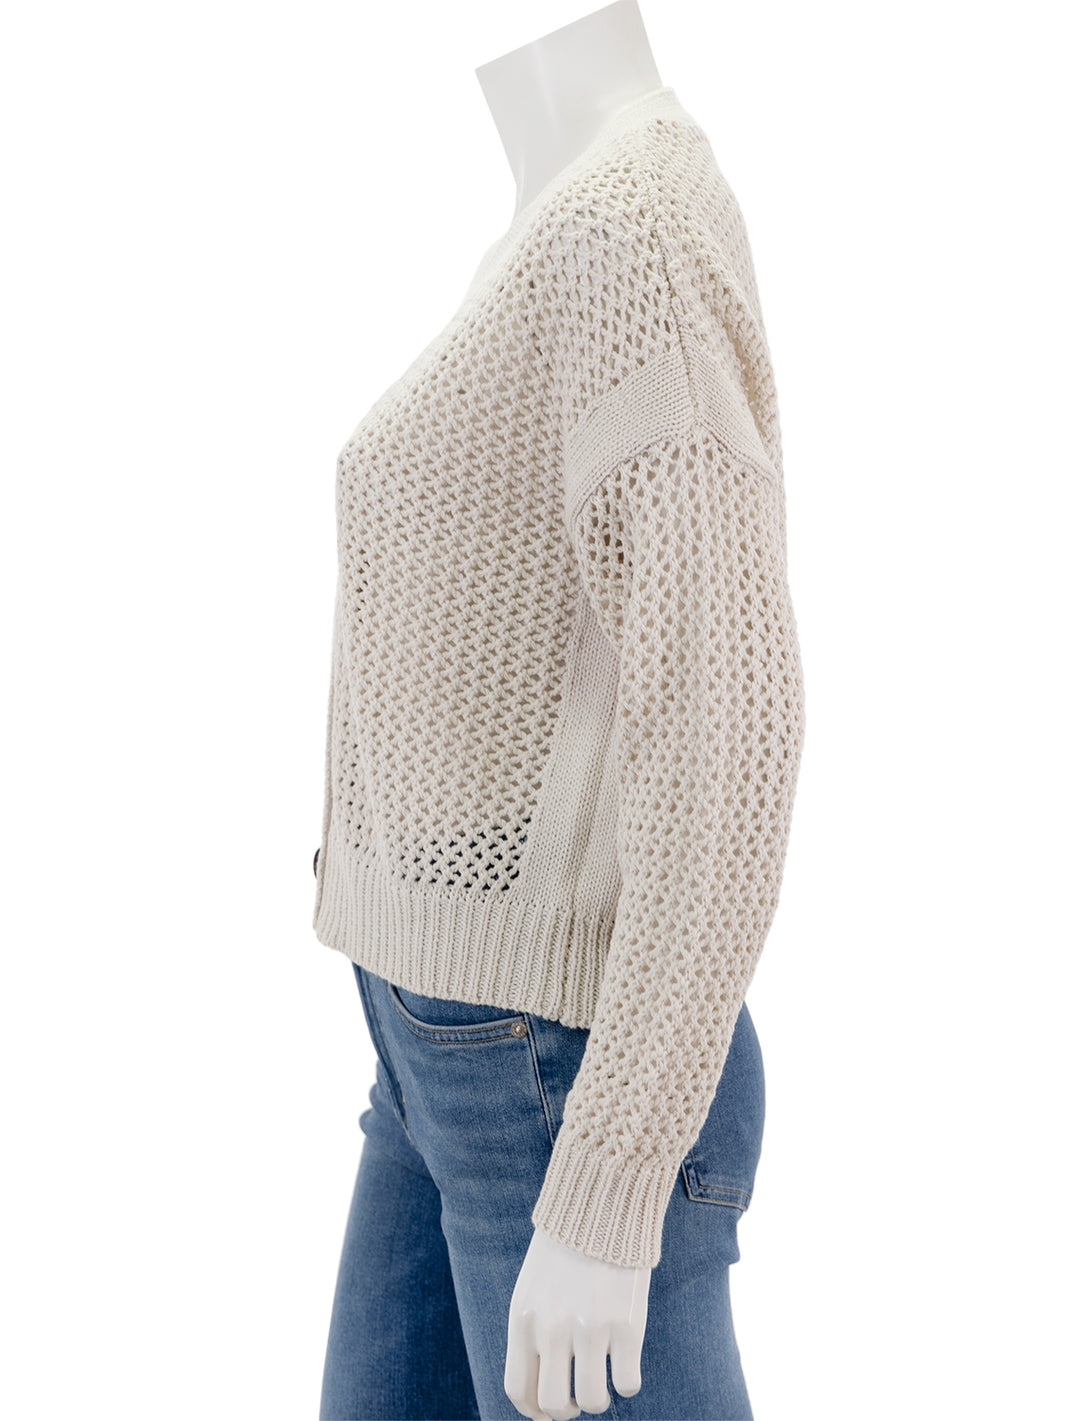 Side view of Self Contrast's maggie fishnet cardigan in seashell.